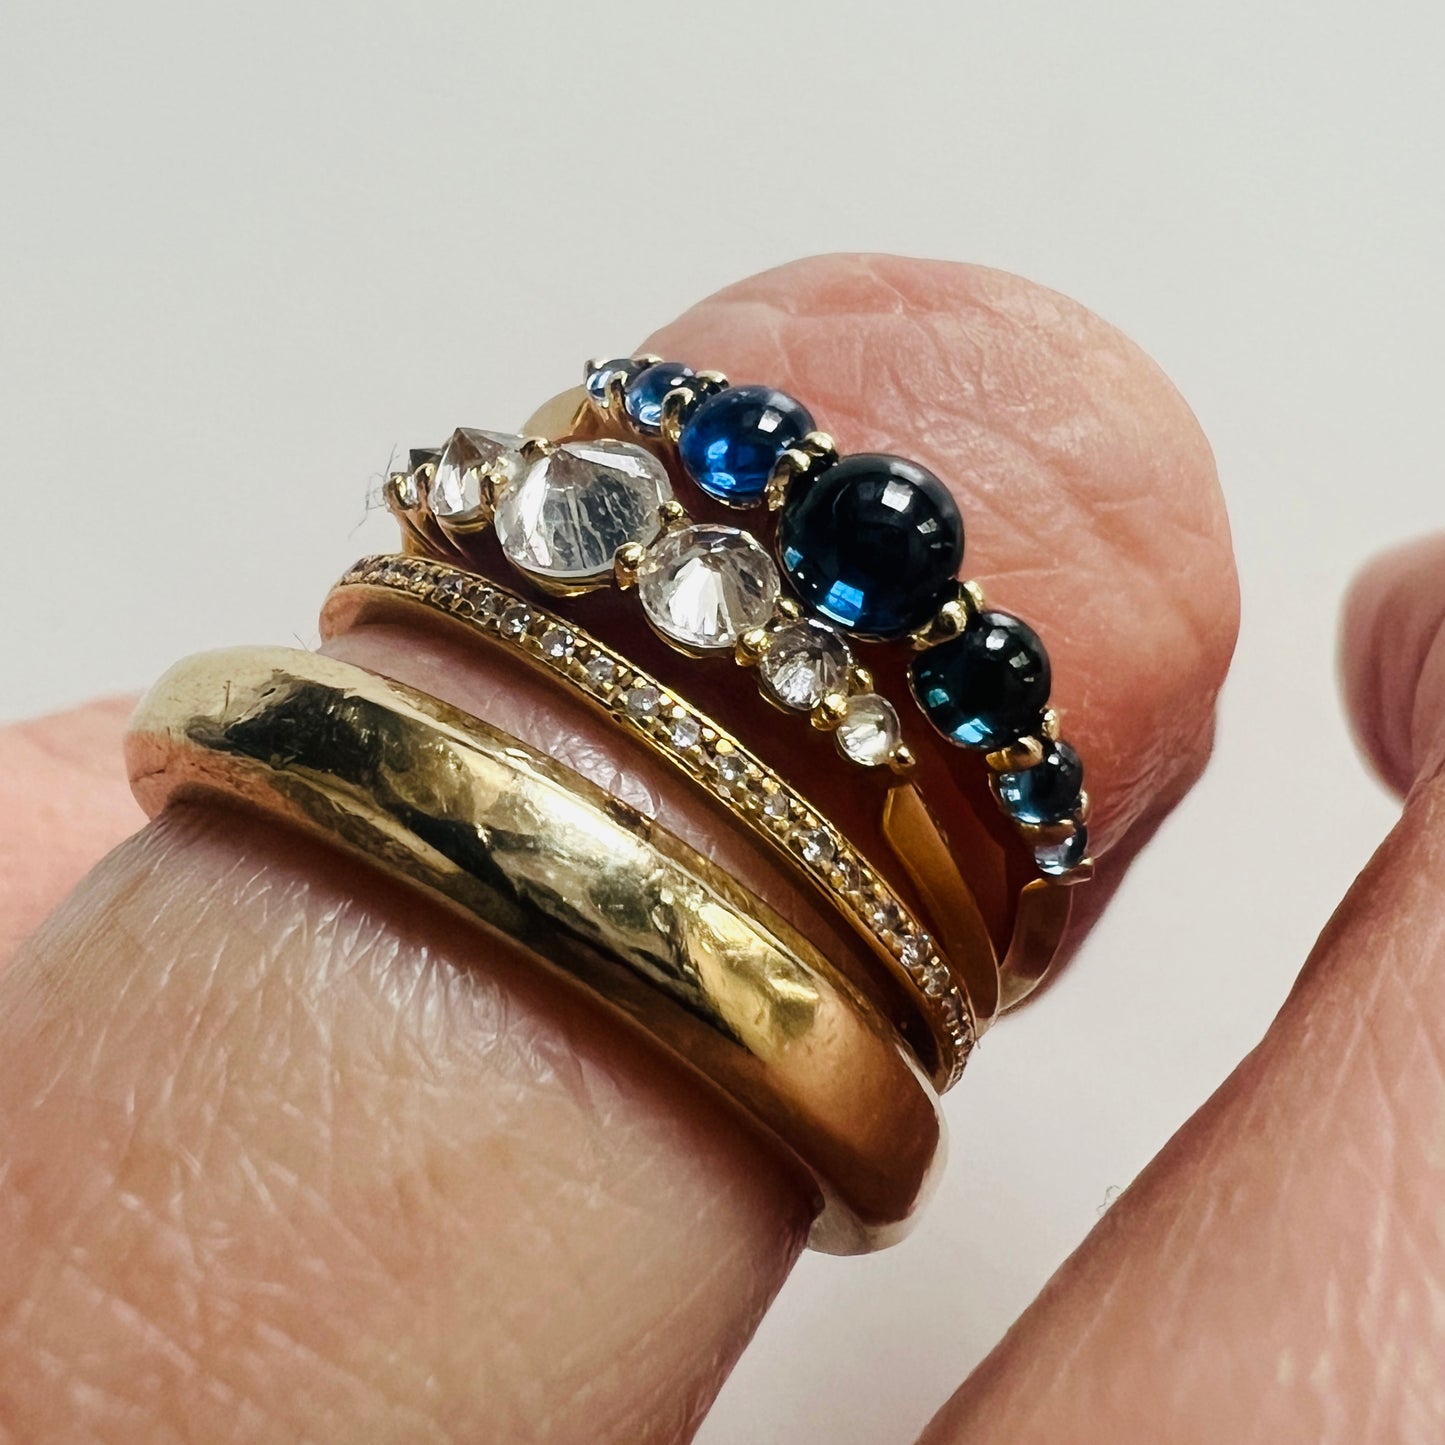 Blue "Jelly Bean" Sapphire Lina Ring